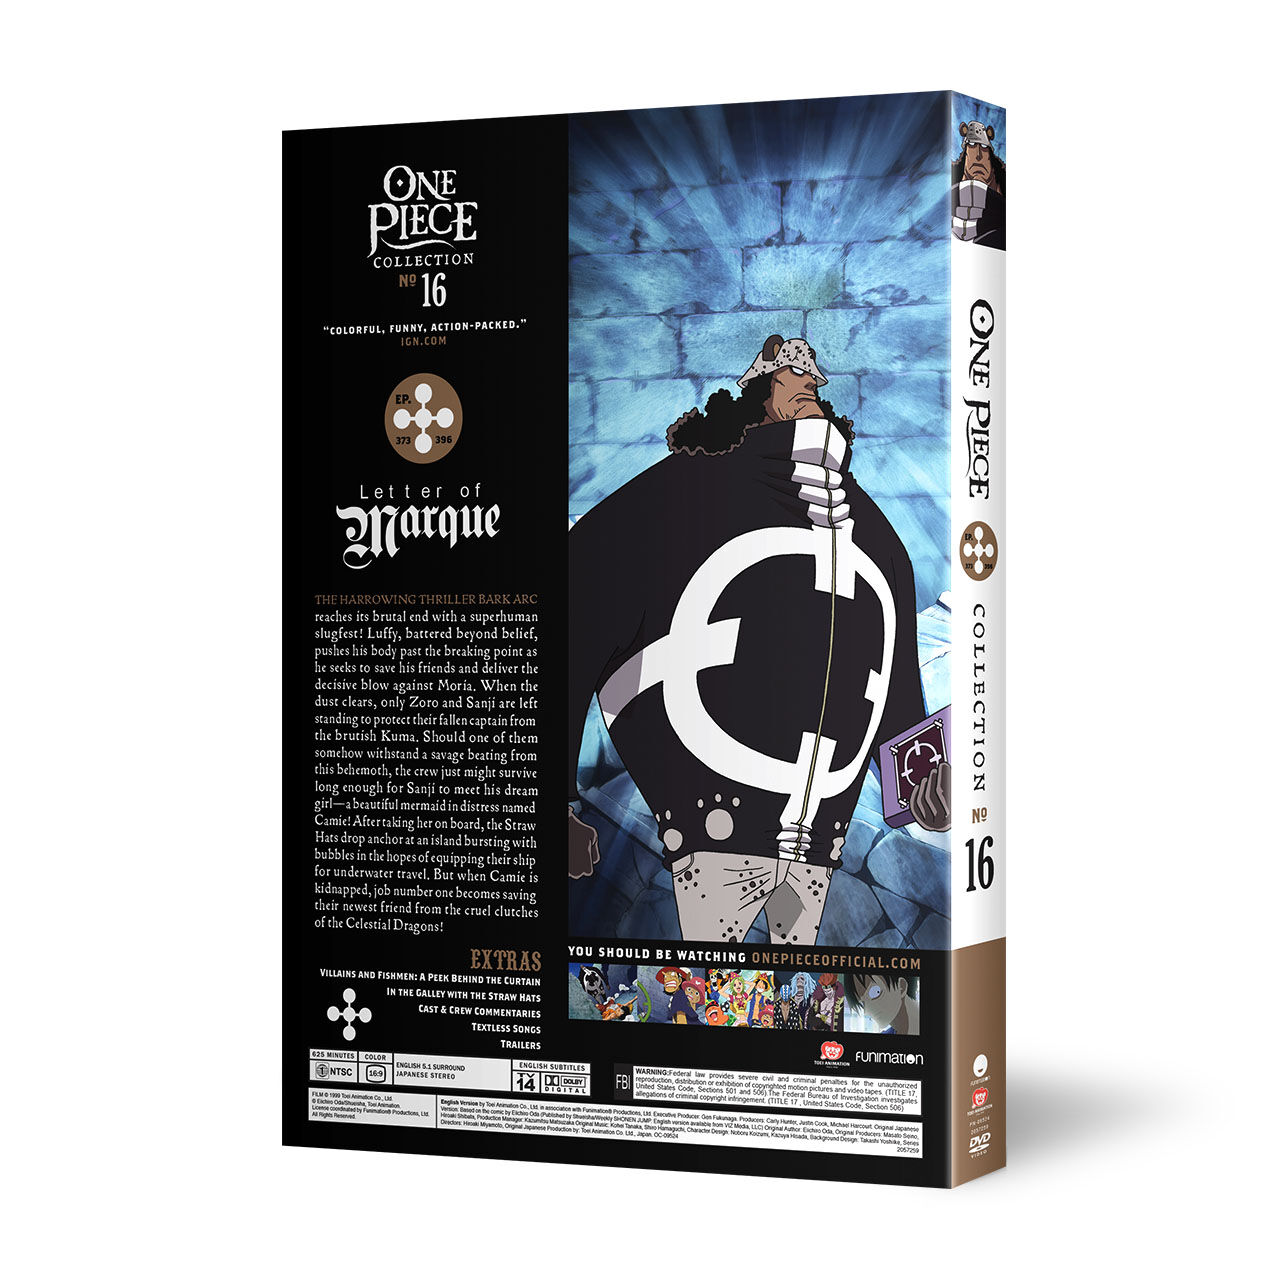 One Piece - Collection 16 - DVD | Crunchyroll Store